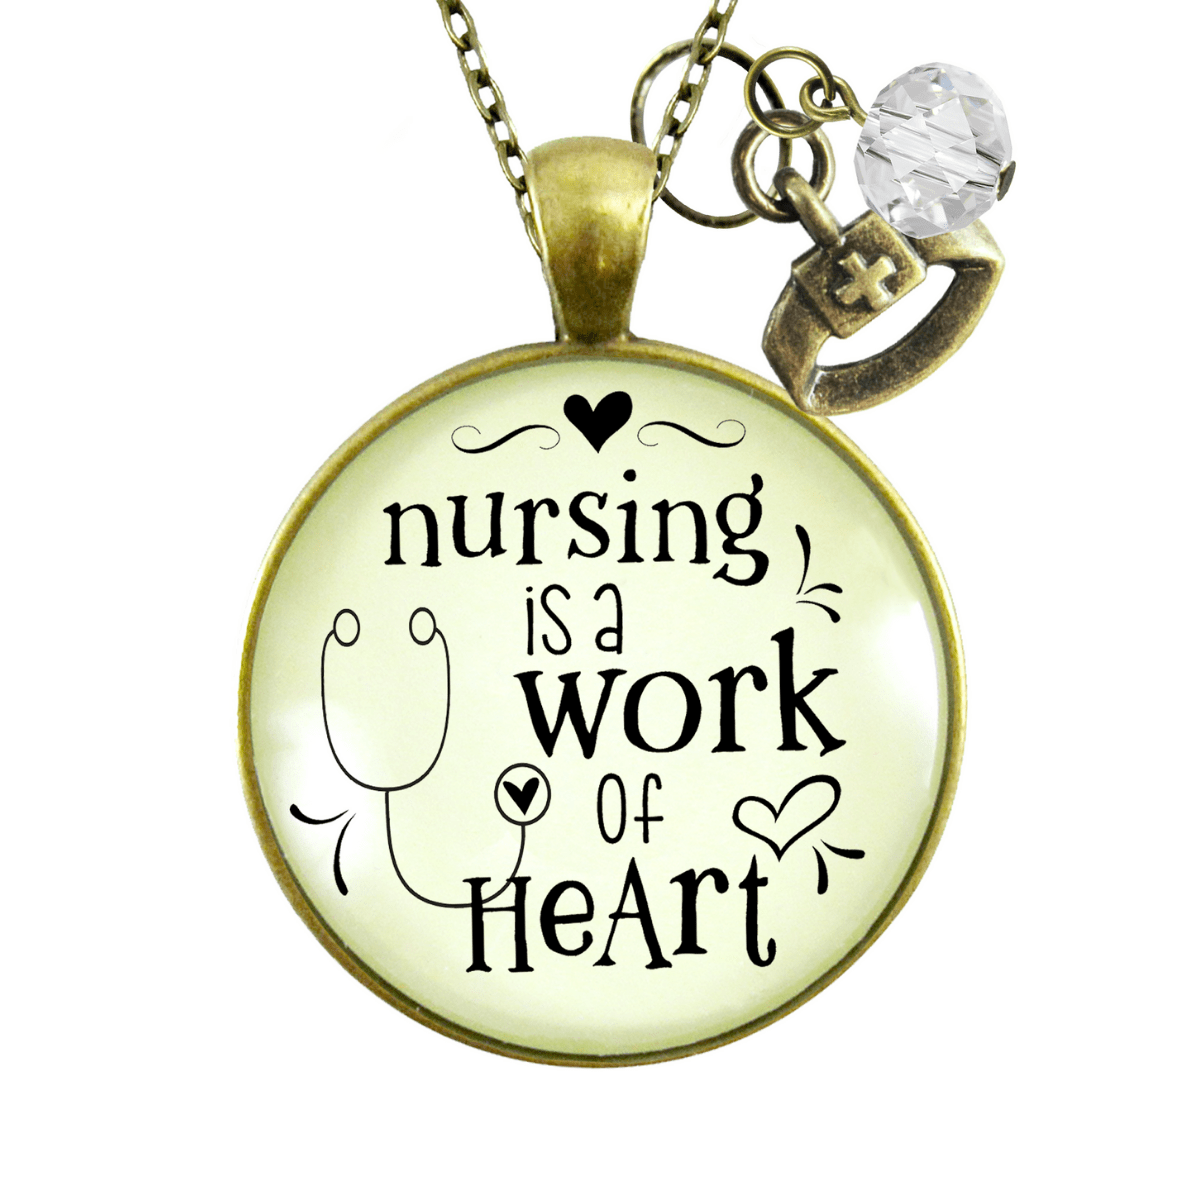 Gutsy Goodness Nurse Necklace Nursing Work Heart Thank You Gift Medical Womens Charm Jewelry - Gutsy Goodness Handmade Jewelry;Nurse Necklace Nursing Work Heart Thank You Gift Medical Womens Charm Jewelry - Gutsy Goodness Handmade Jewelry Gifts